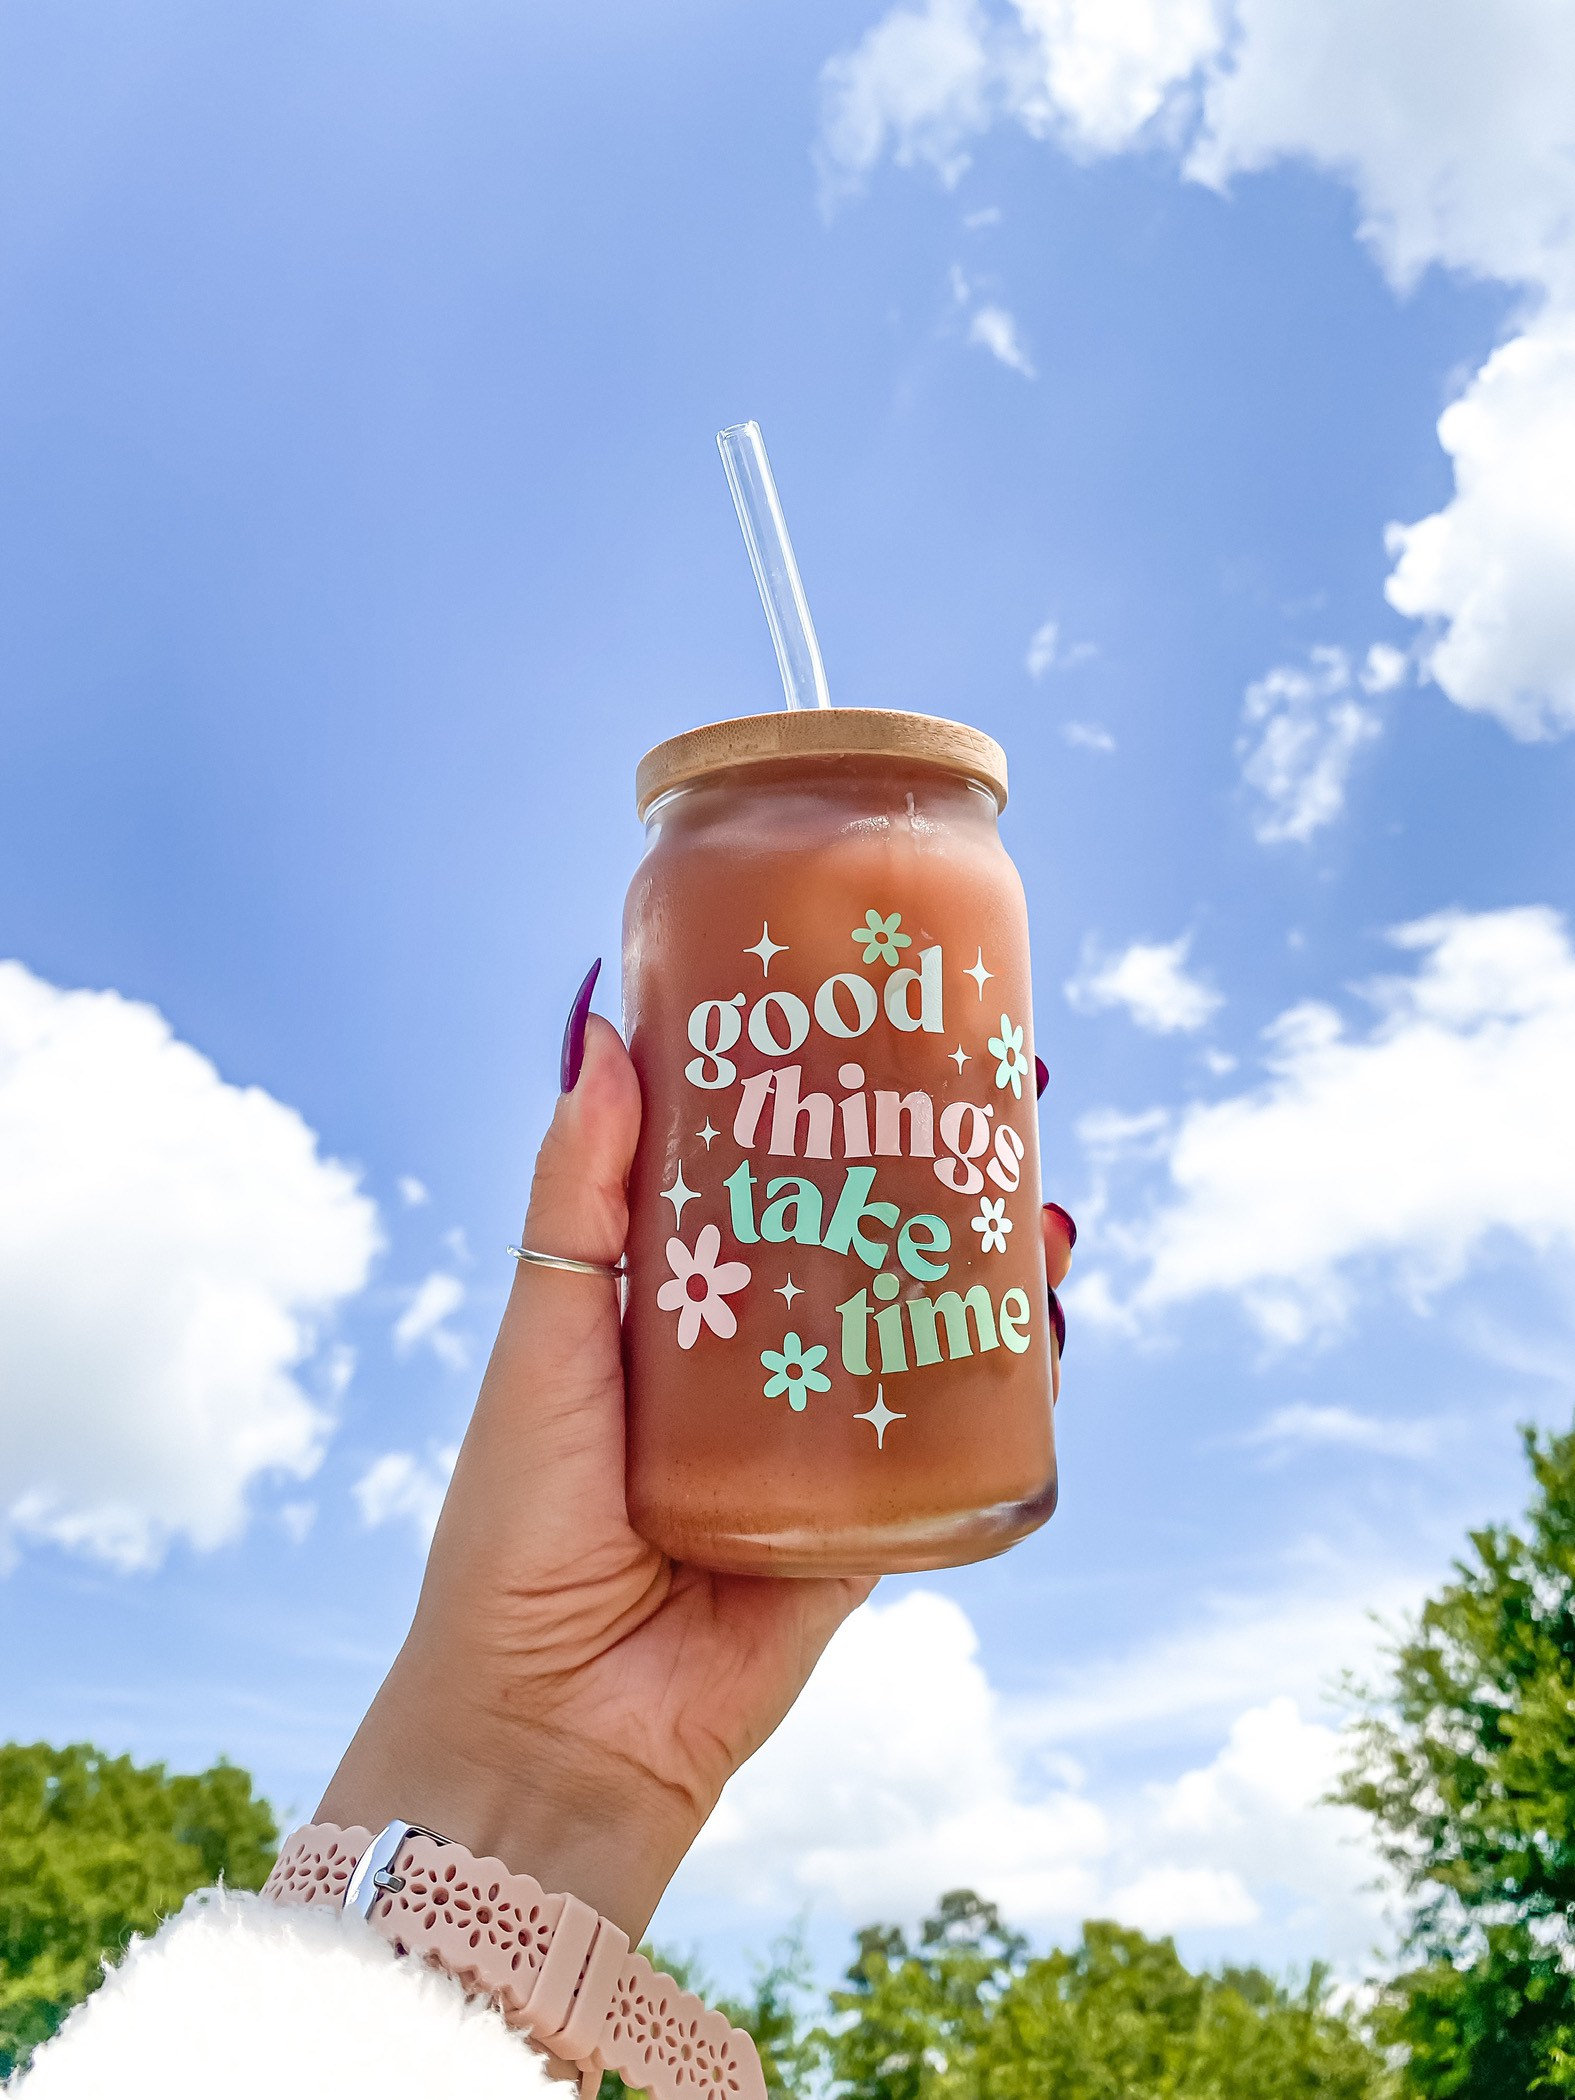 Be A Good Person Can-Shaped Cup